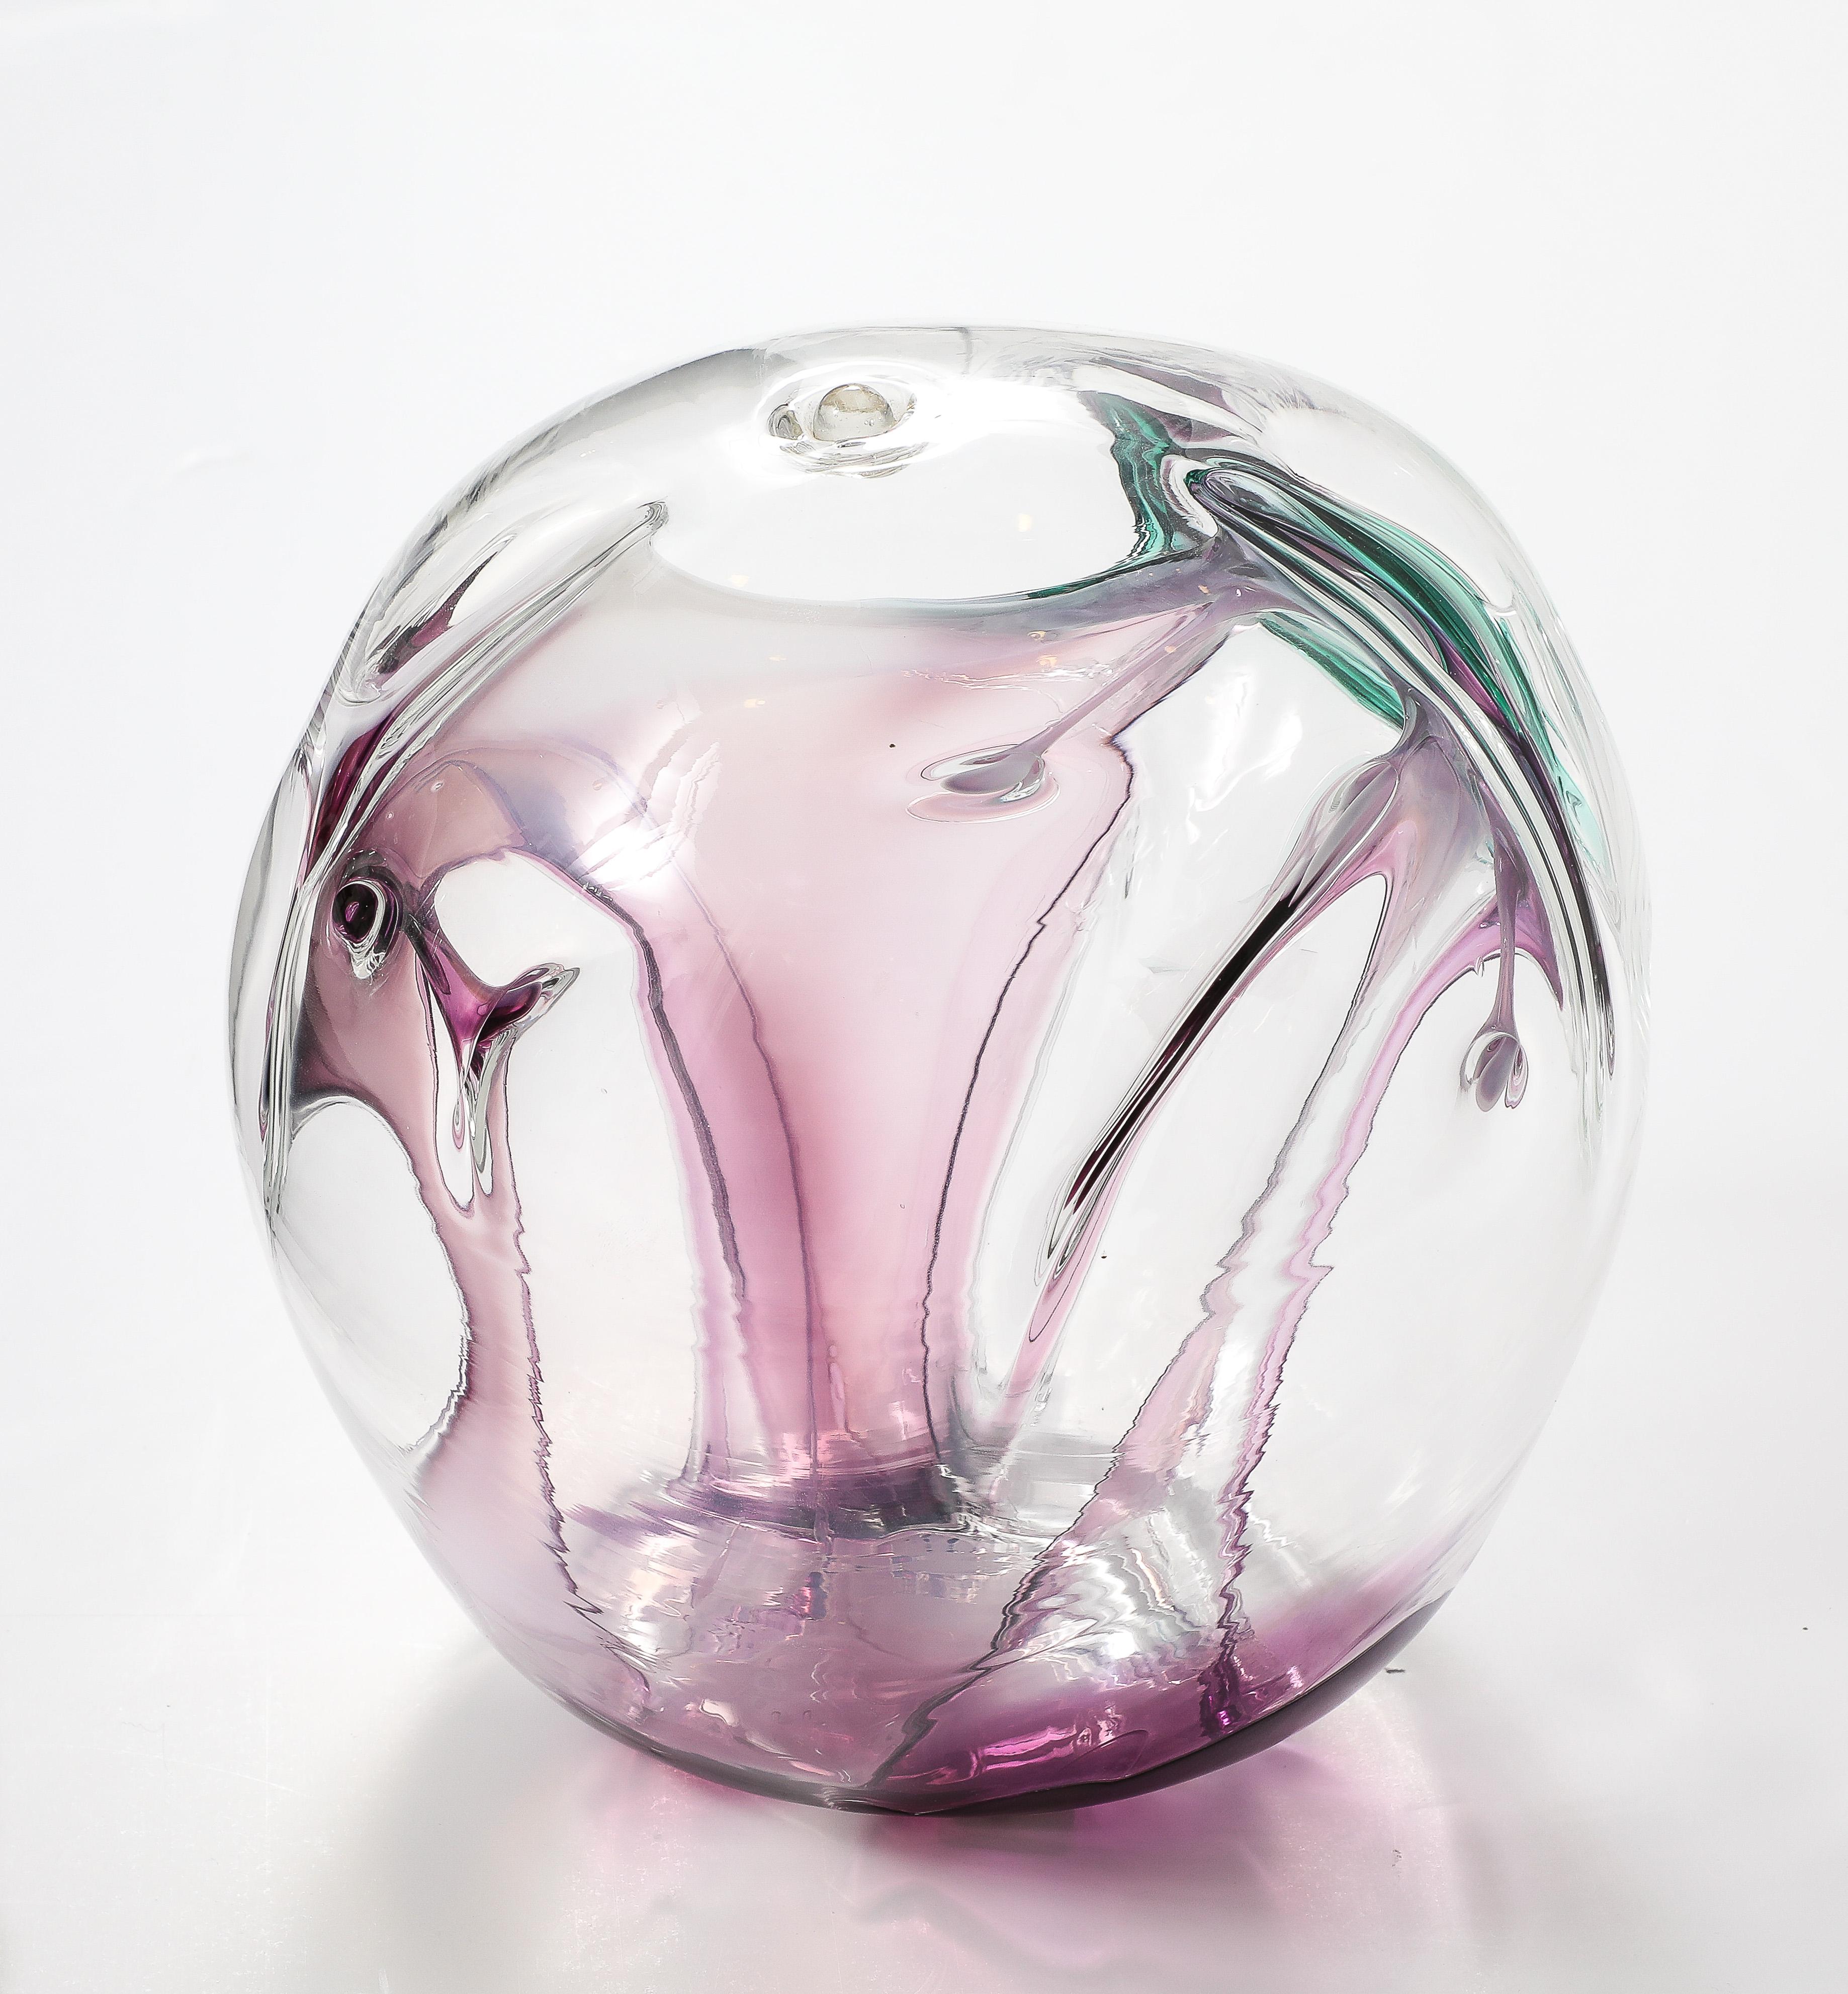 Blown Glass Peter Bramhall Glass Orb sculpture, Dated 1998. For Sale